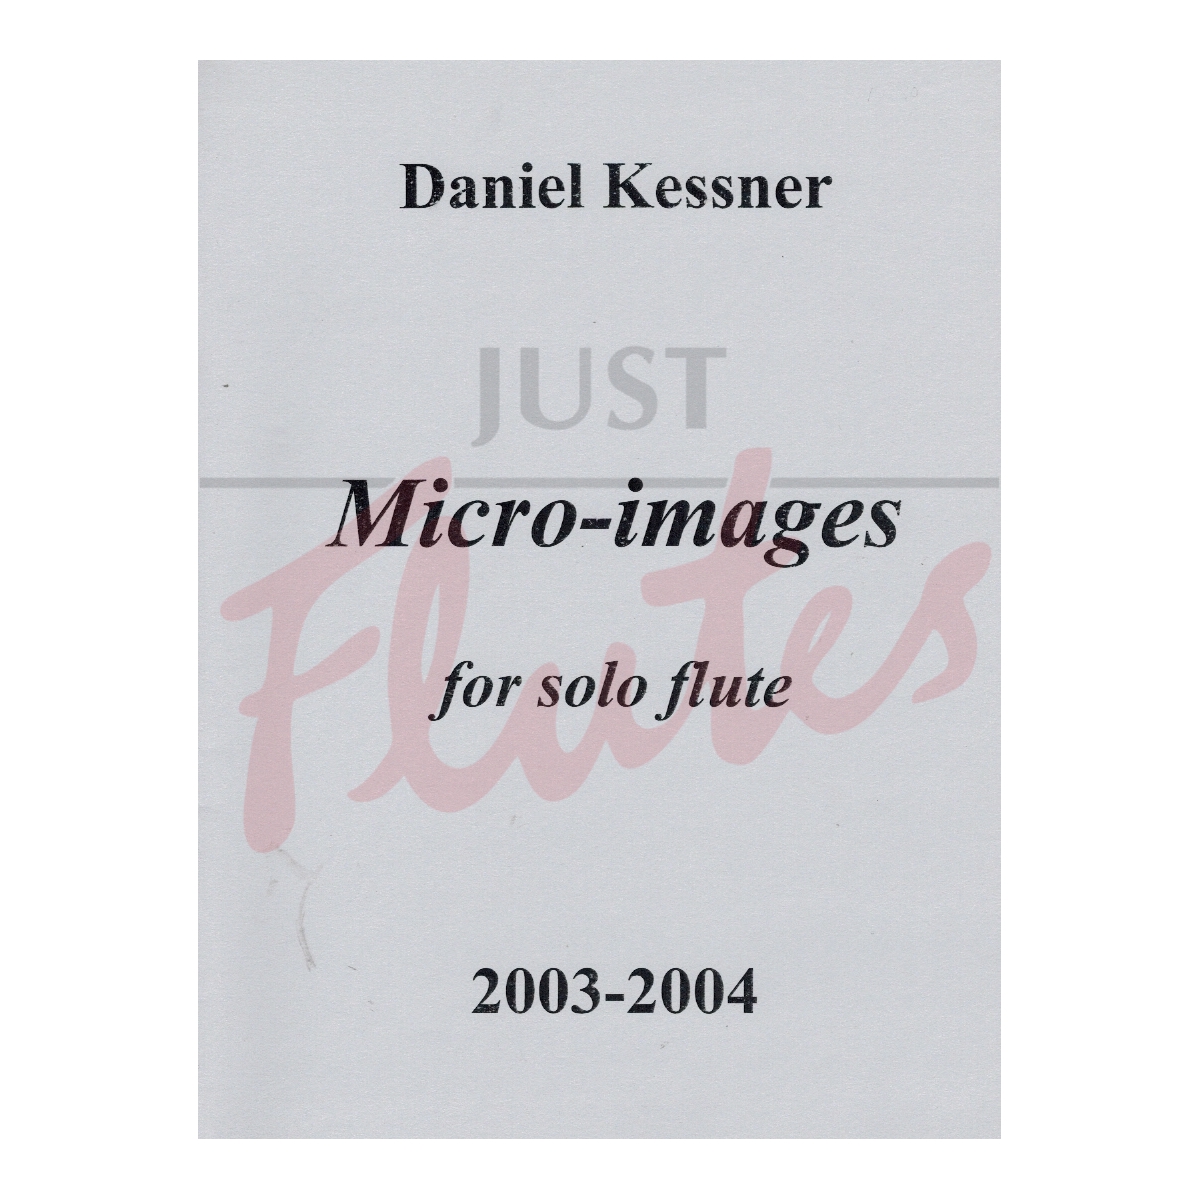 Micro-images